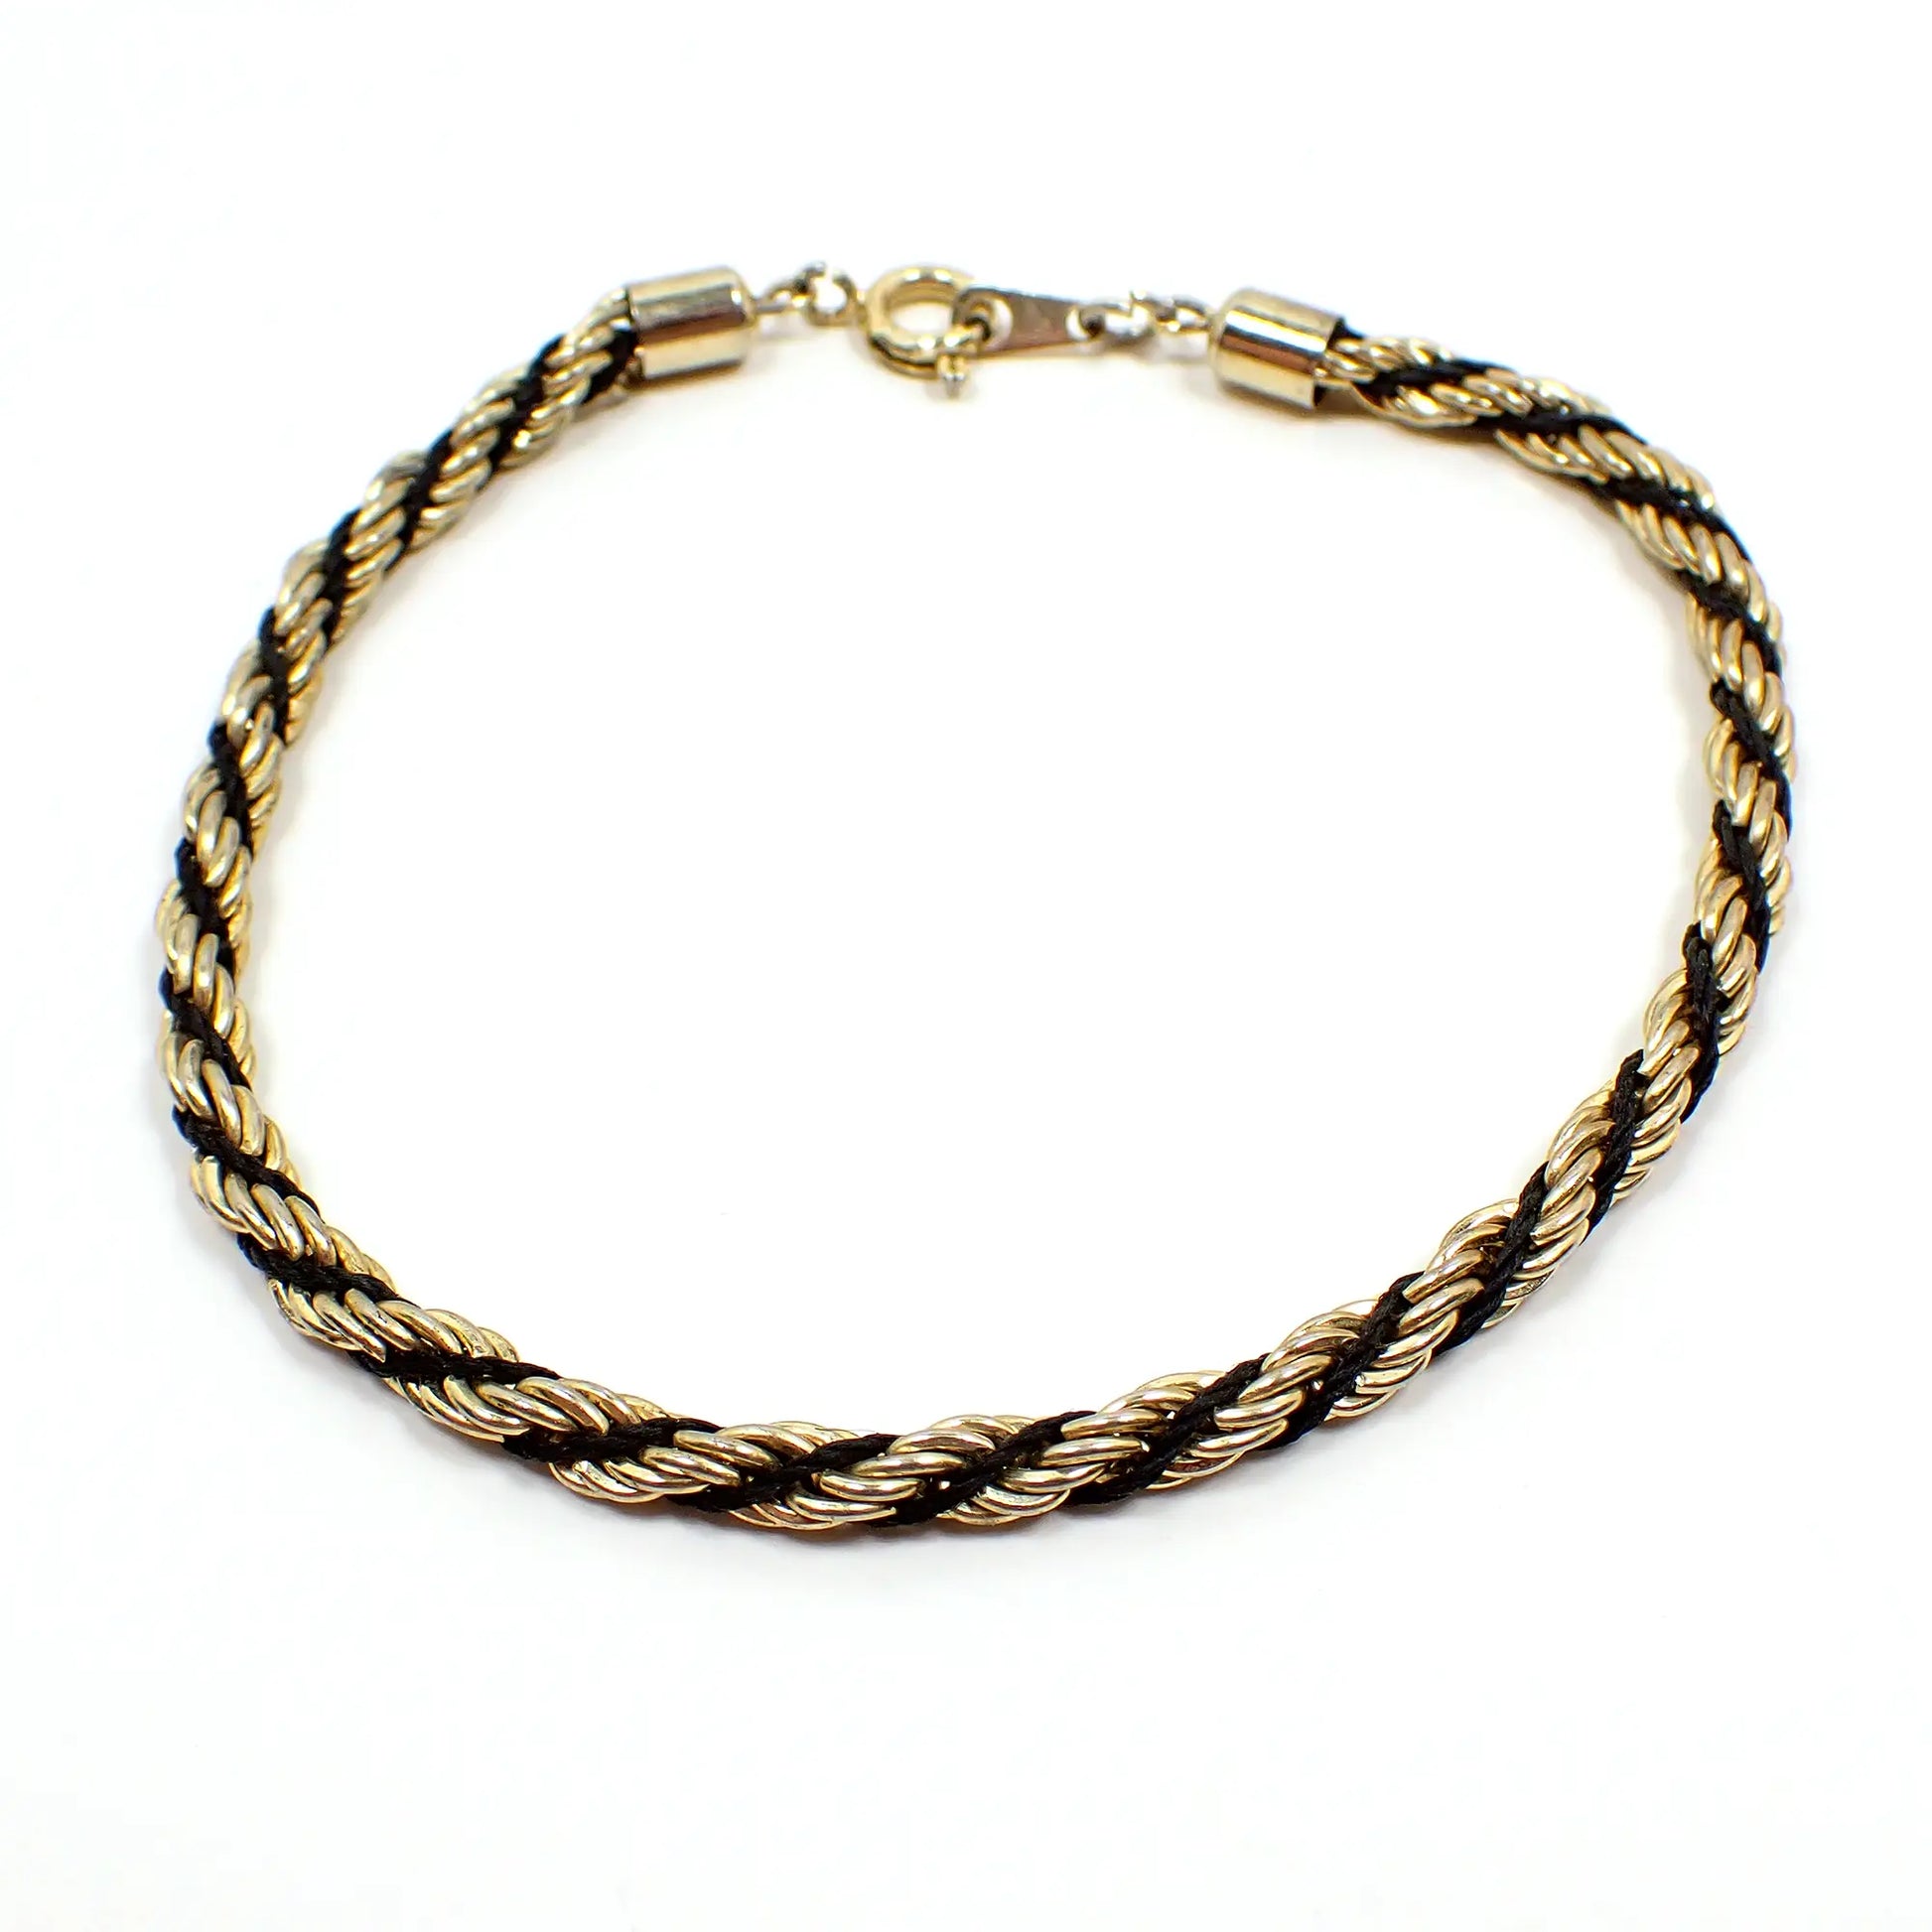 Top view of the retro vintage twisted rope chain bracelet. The metal is gold tone in color. It has a twisted design with black stringing material and a spring ring clasp at the end.